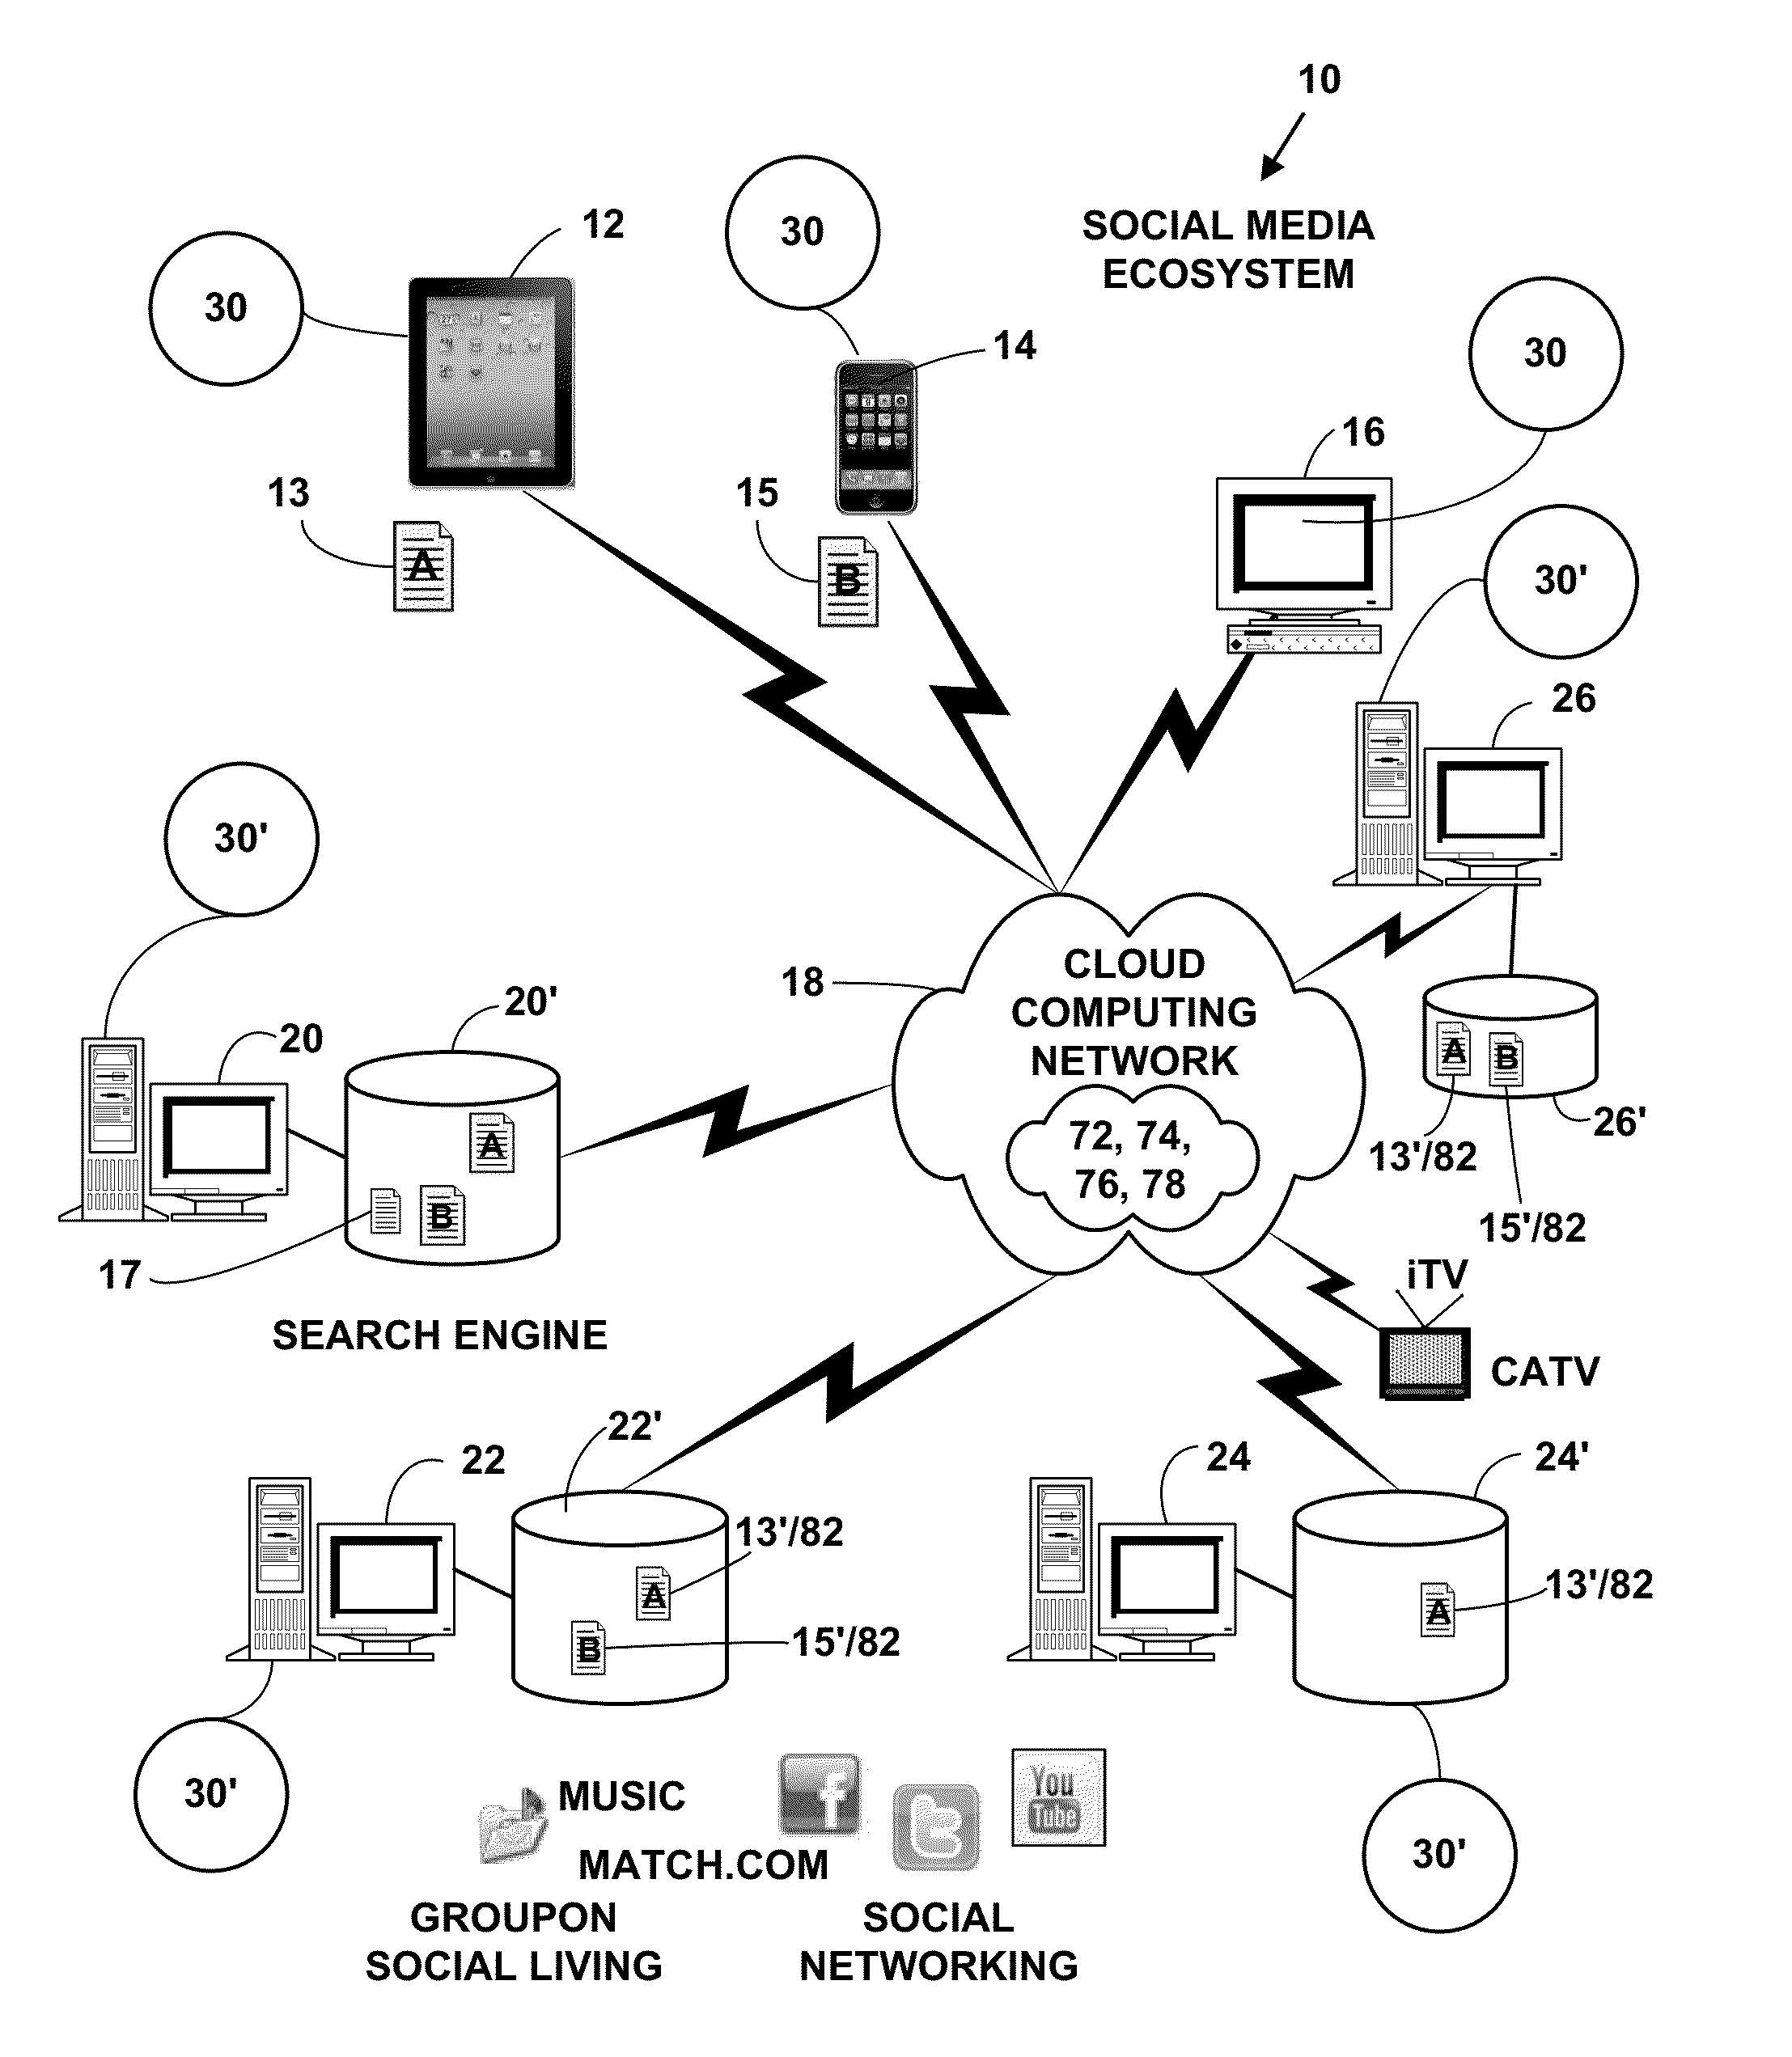 Method and system for providing social search and connection services with a social media ecosystem